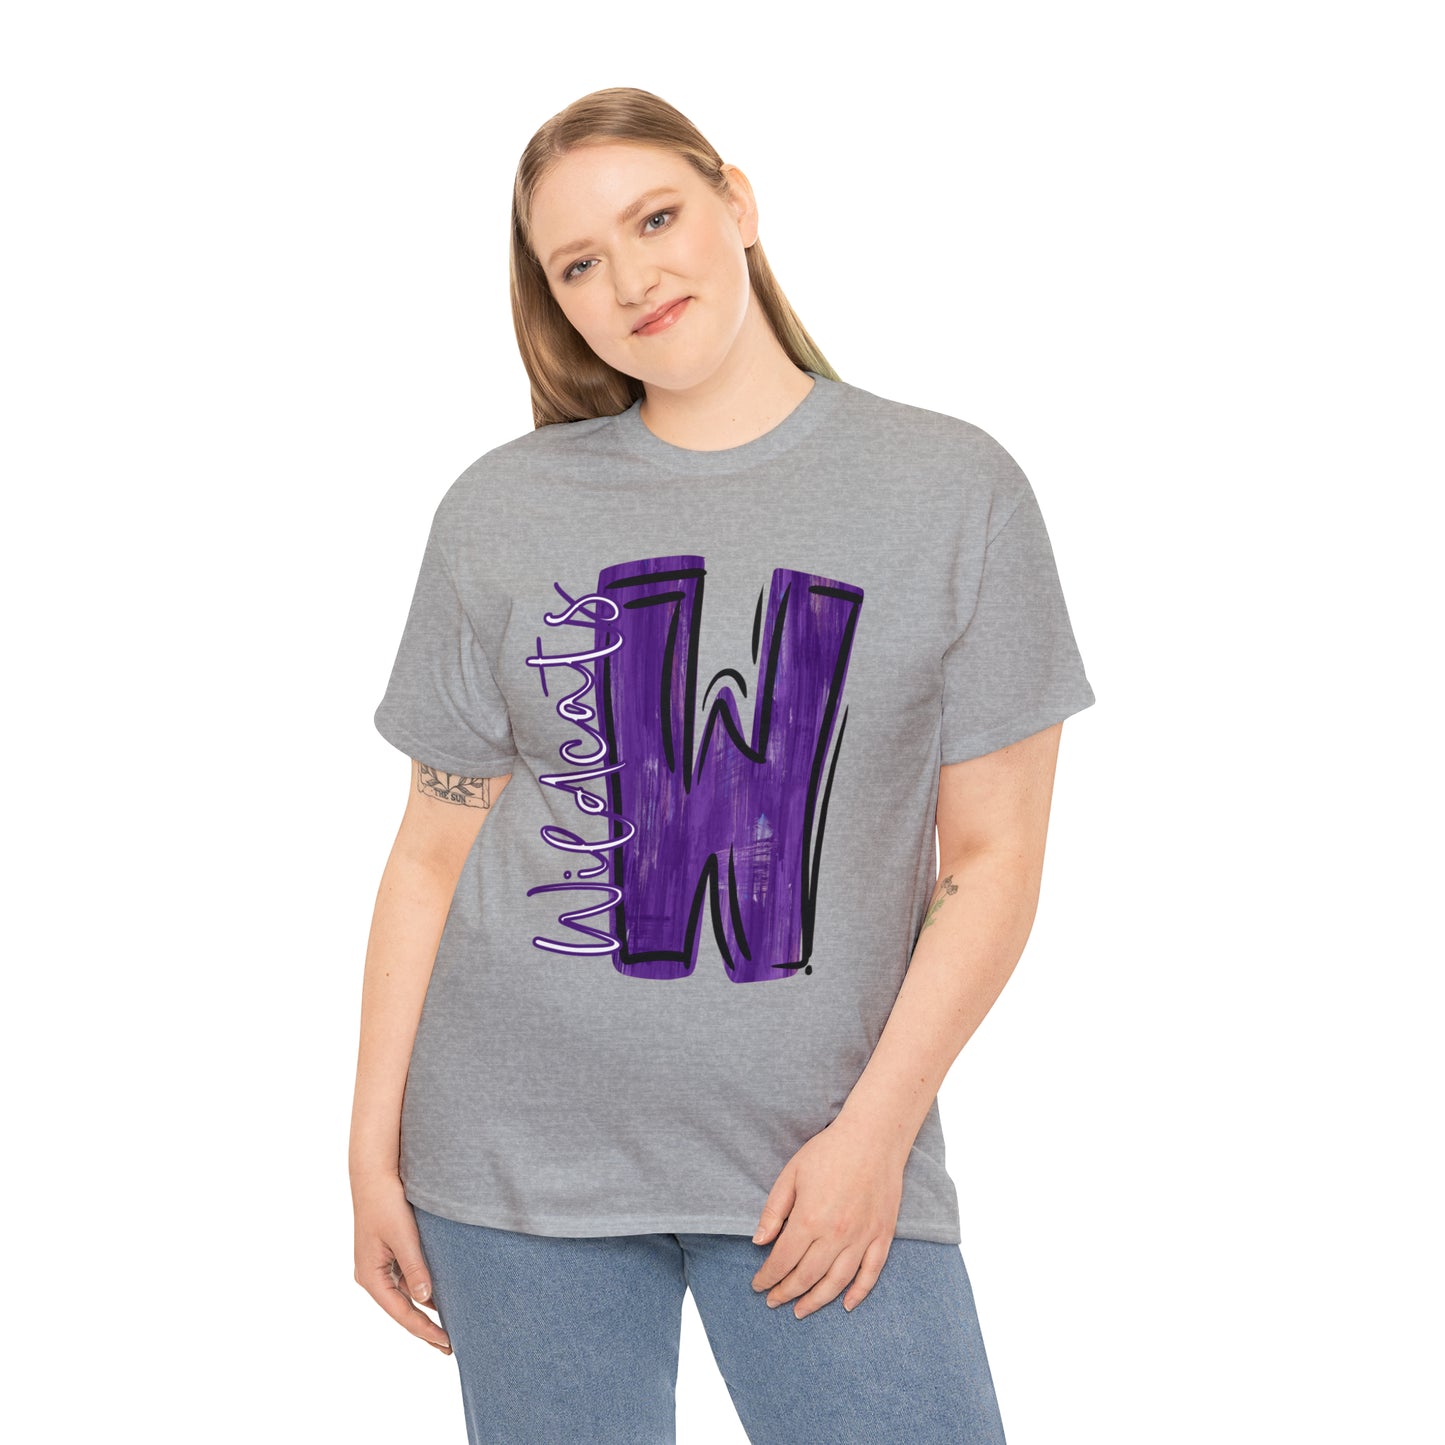 Wildcat Painted W T-Shirt Adult Sizes